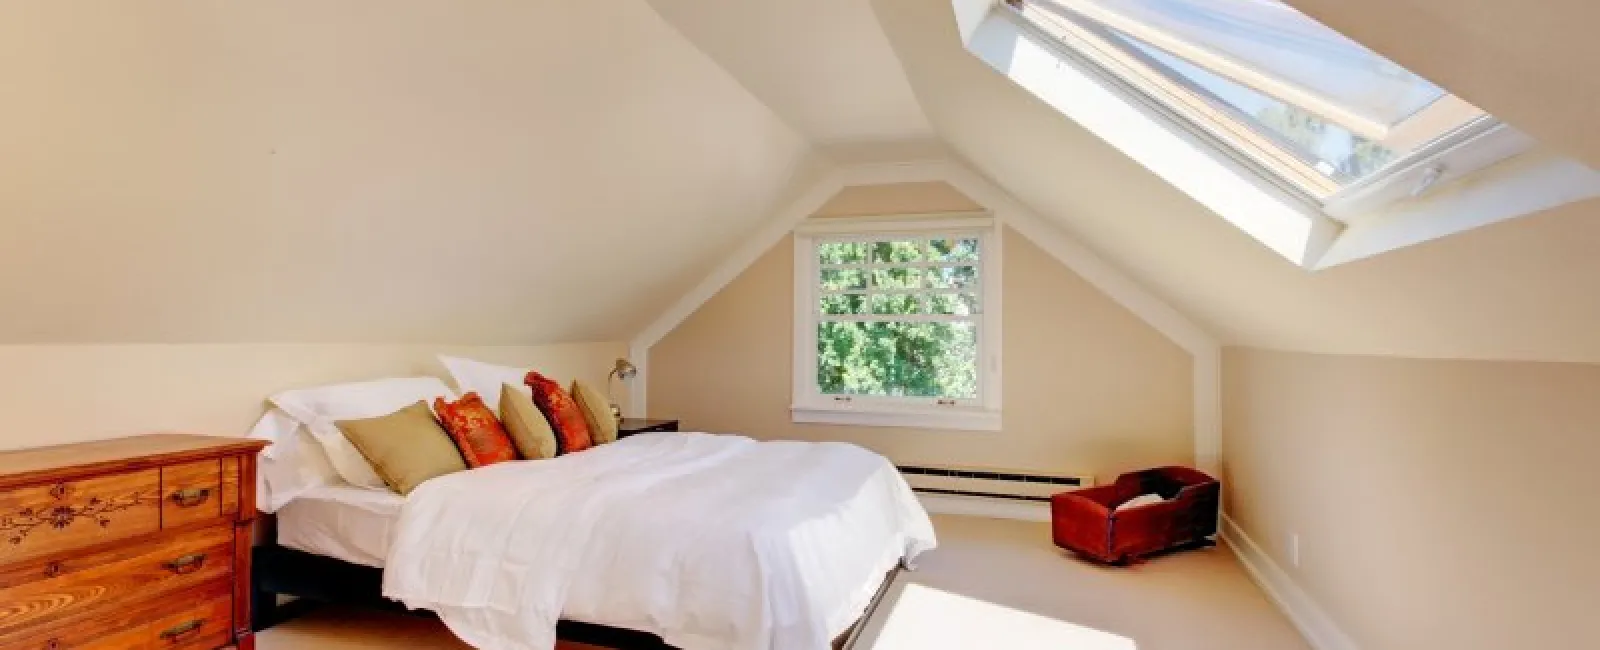 Skylights and Your Roof: The Pros and Cons